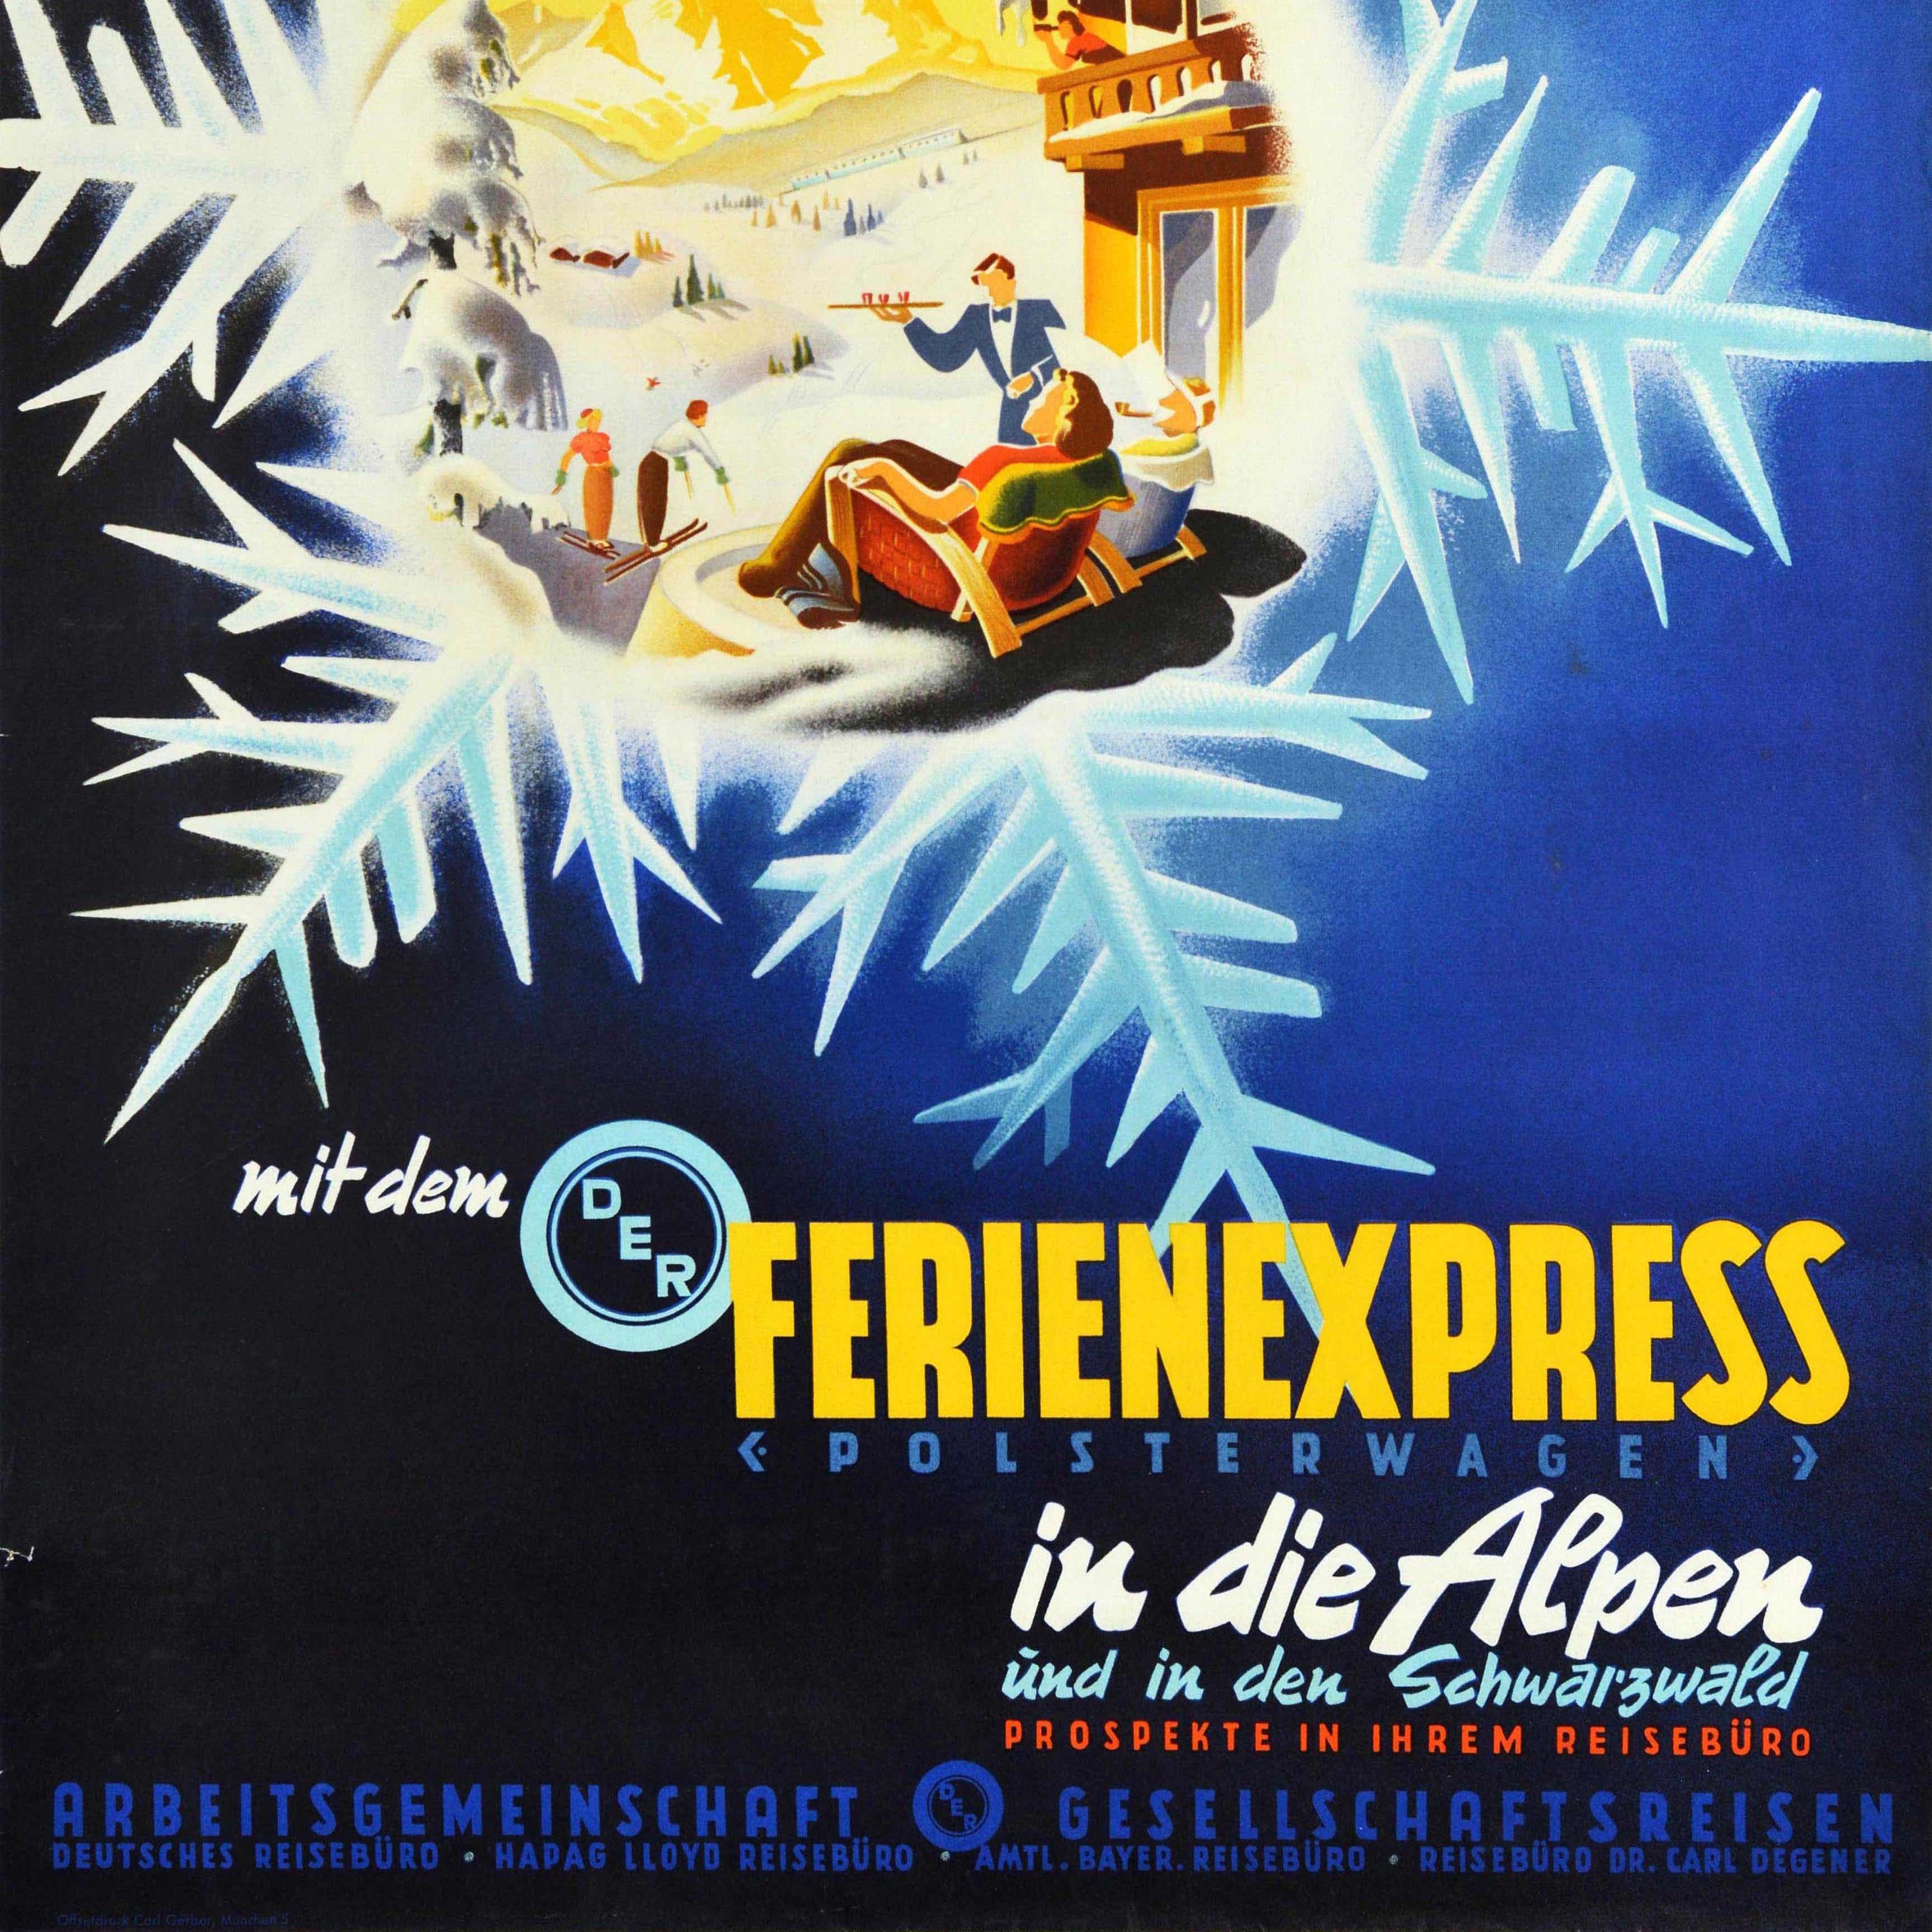 Original vintage winter sport and ski travel poster - mit der Ferienexpress Polsterwagen in die Alpen und in den Schwarzwald / by Holiday Express upholstered carriage to the Alps and the Black Forest - featuring a great design depicting a scenic